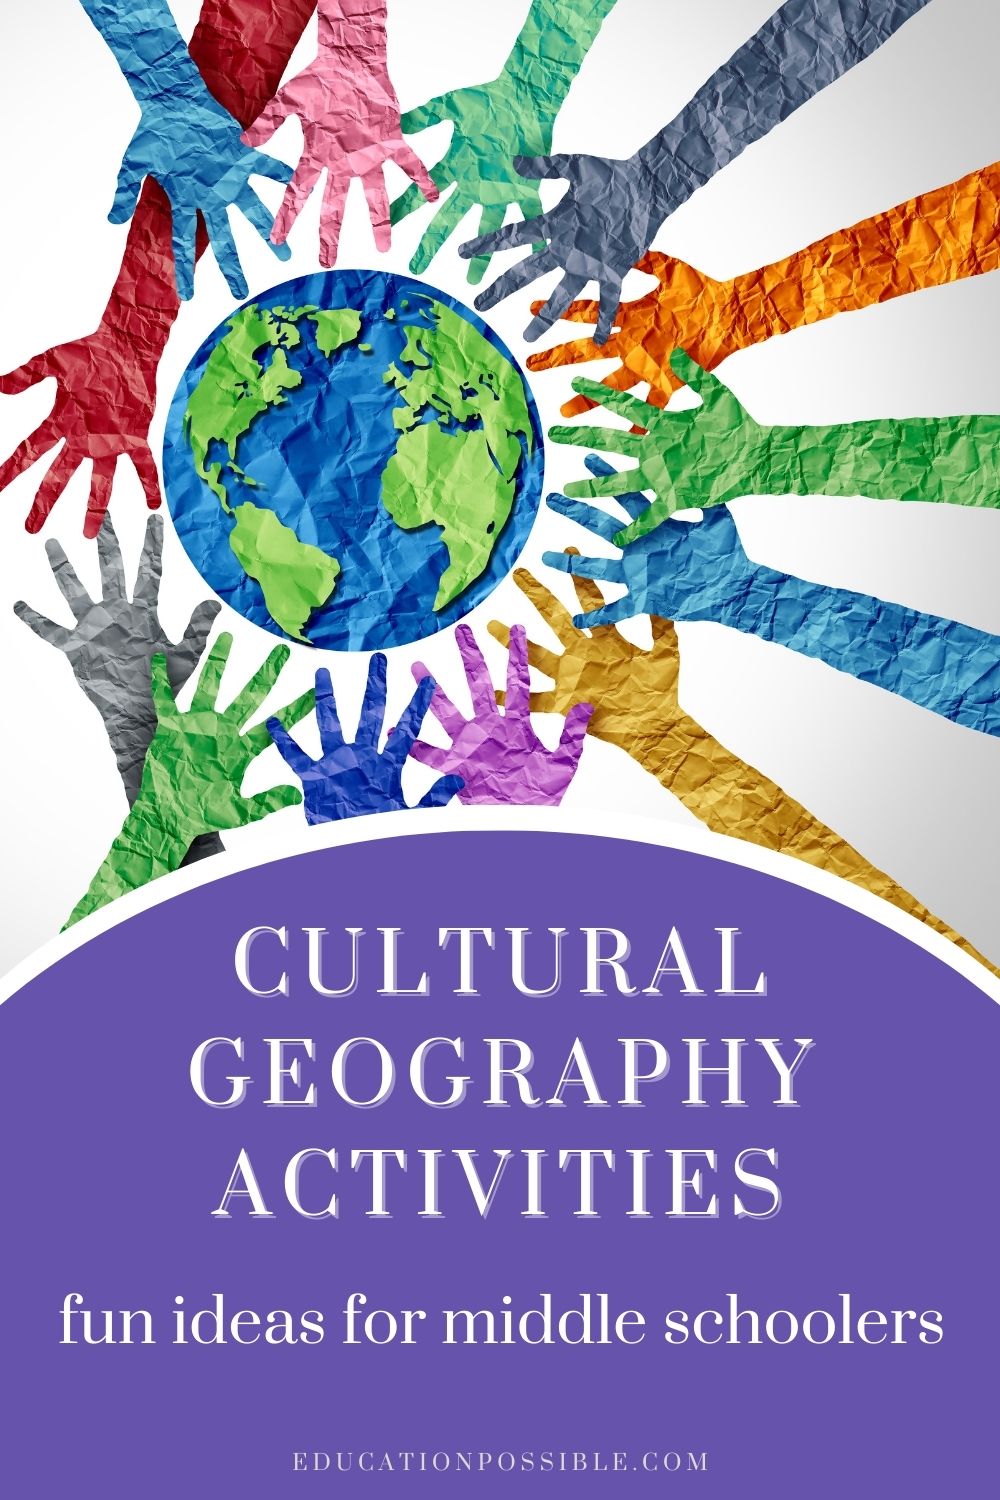 Cultural Geography Activities